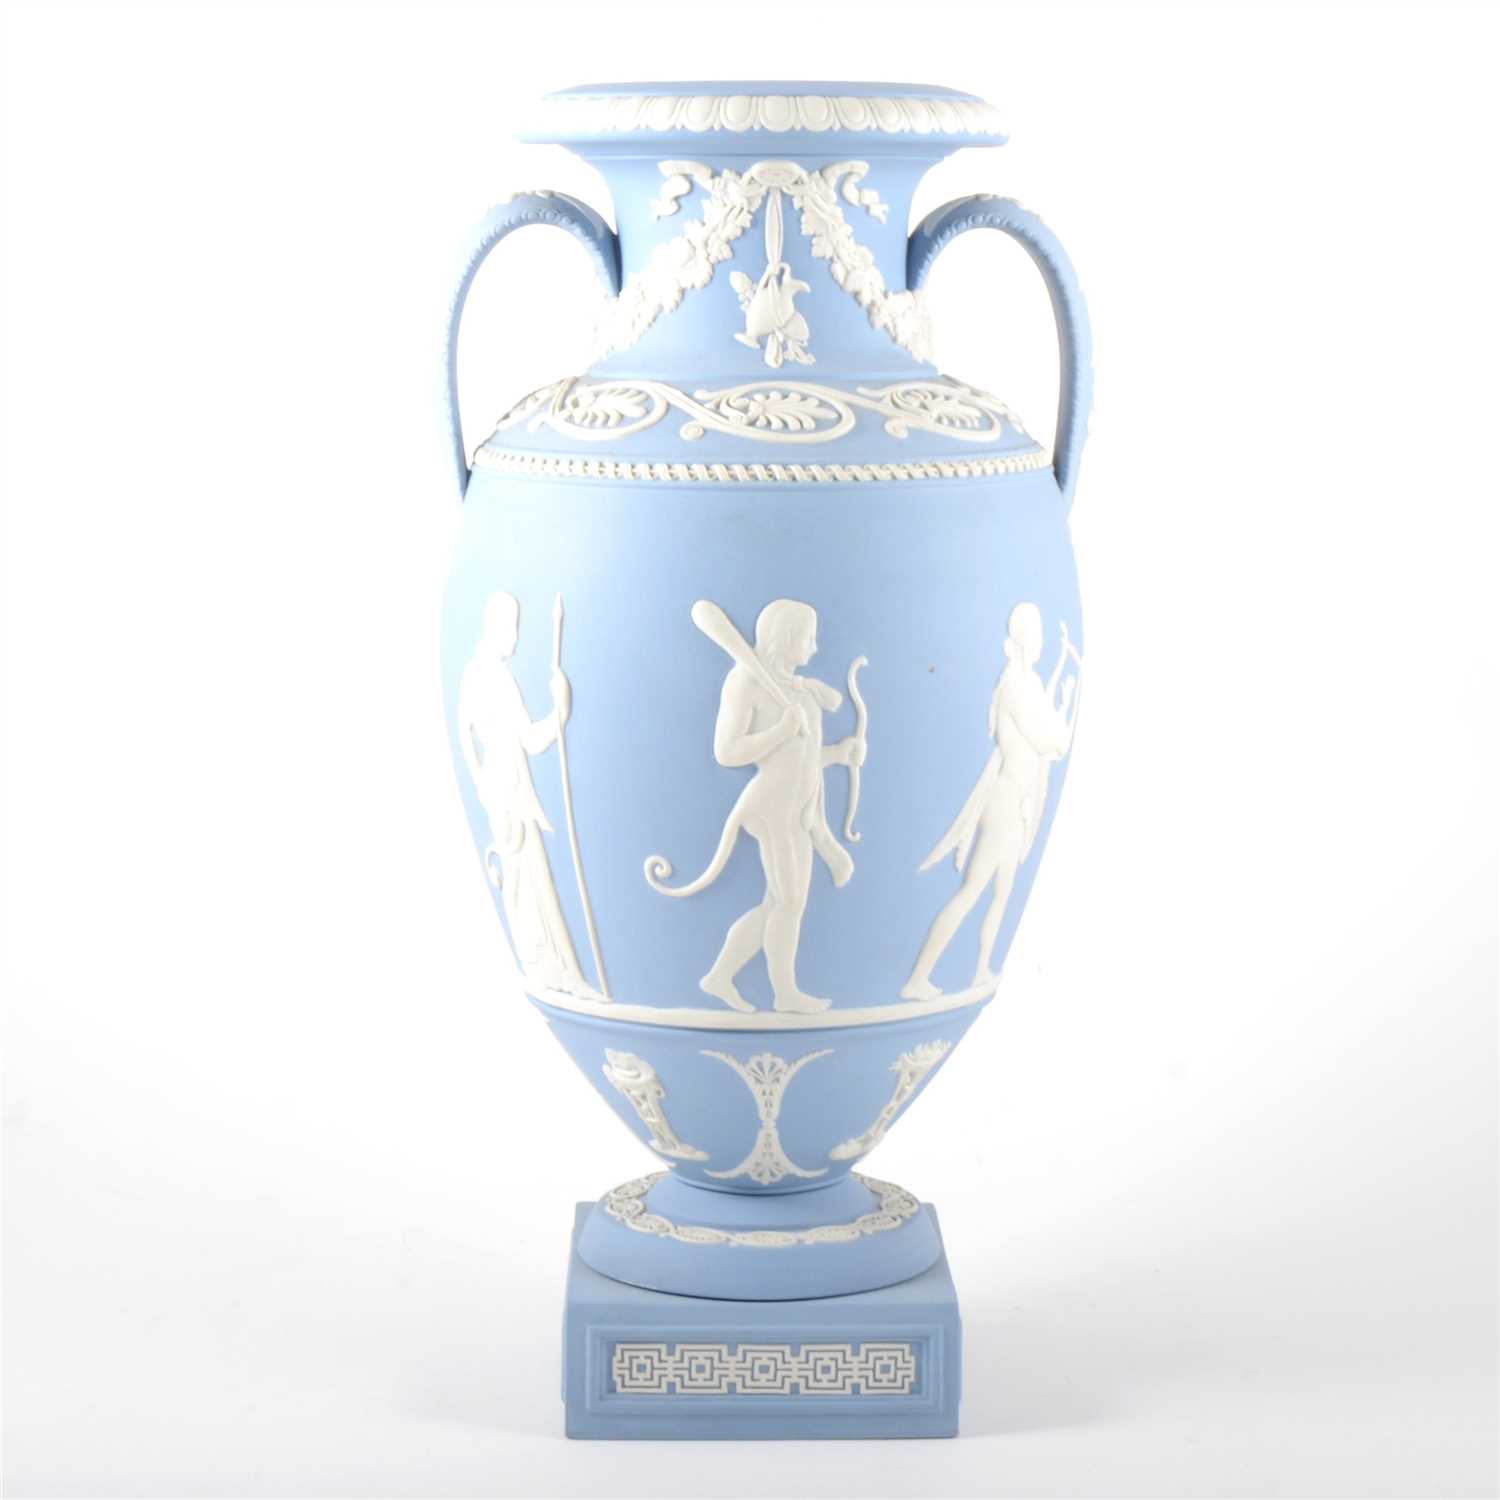 Lot 32 - A limited edition Genius Collection vase, 'Procession of the Deities', by Wedgwood.